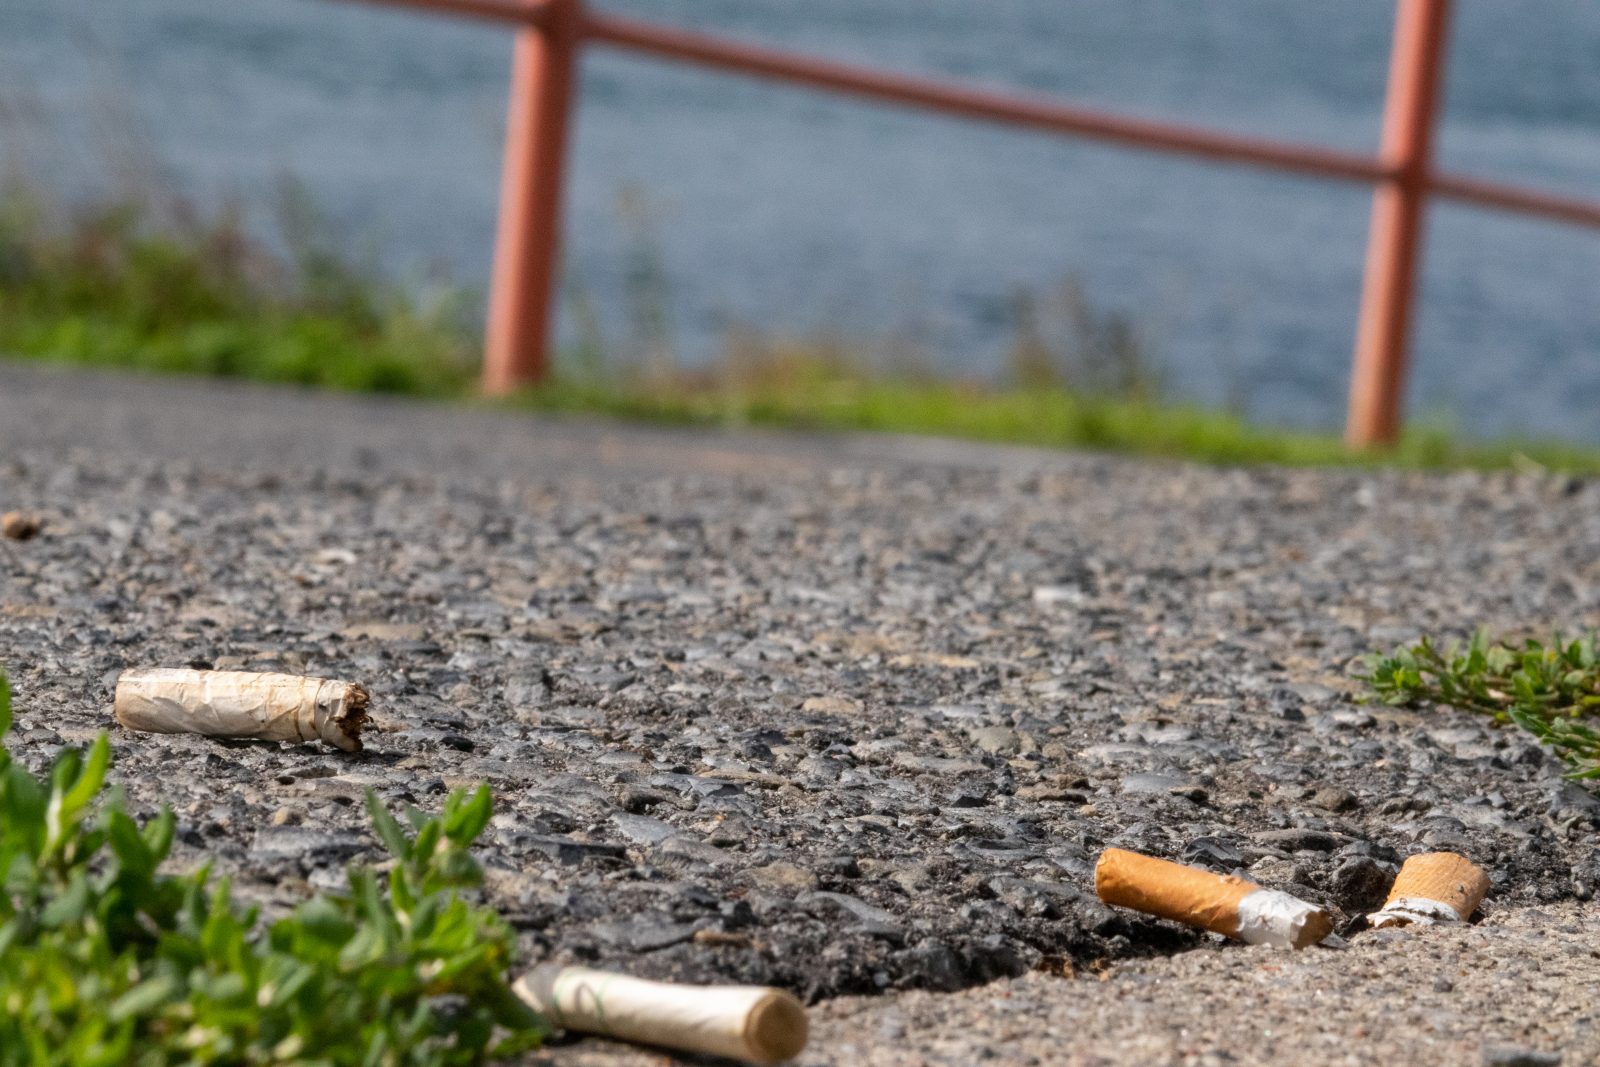 Council moves to ban smoking from all public parks